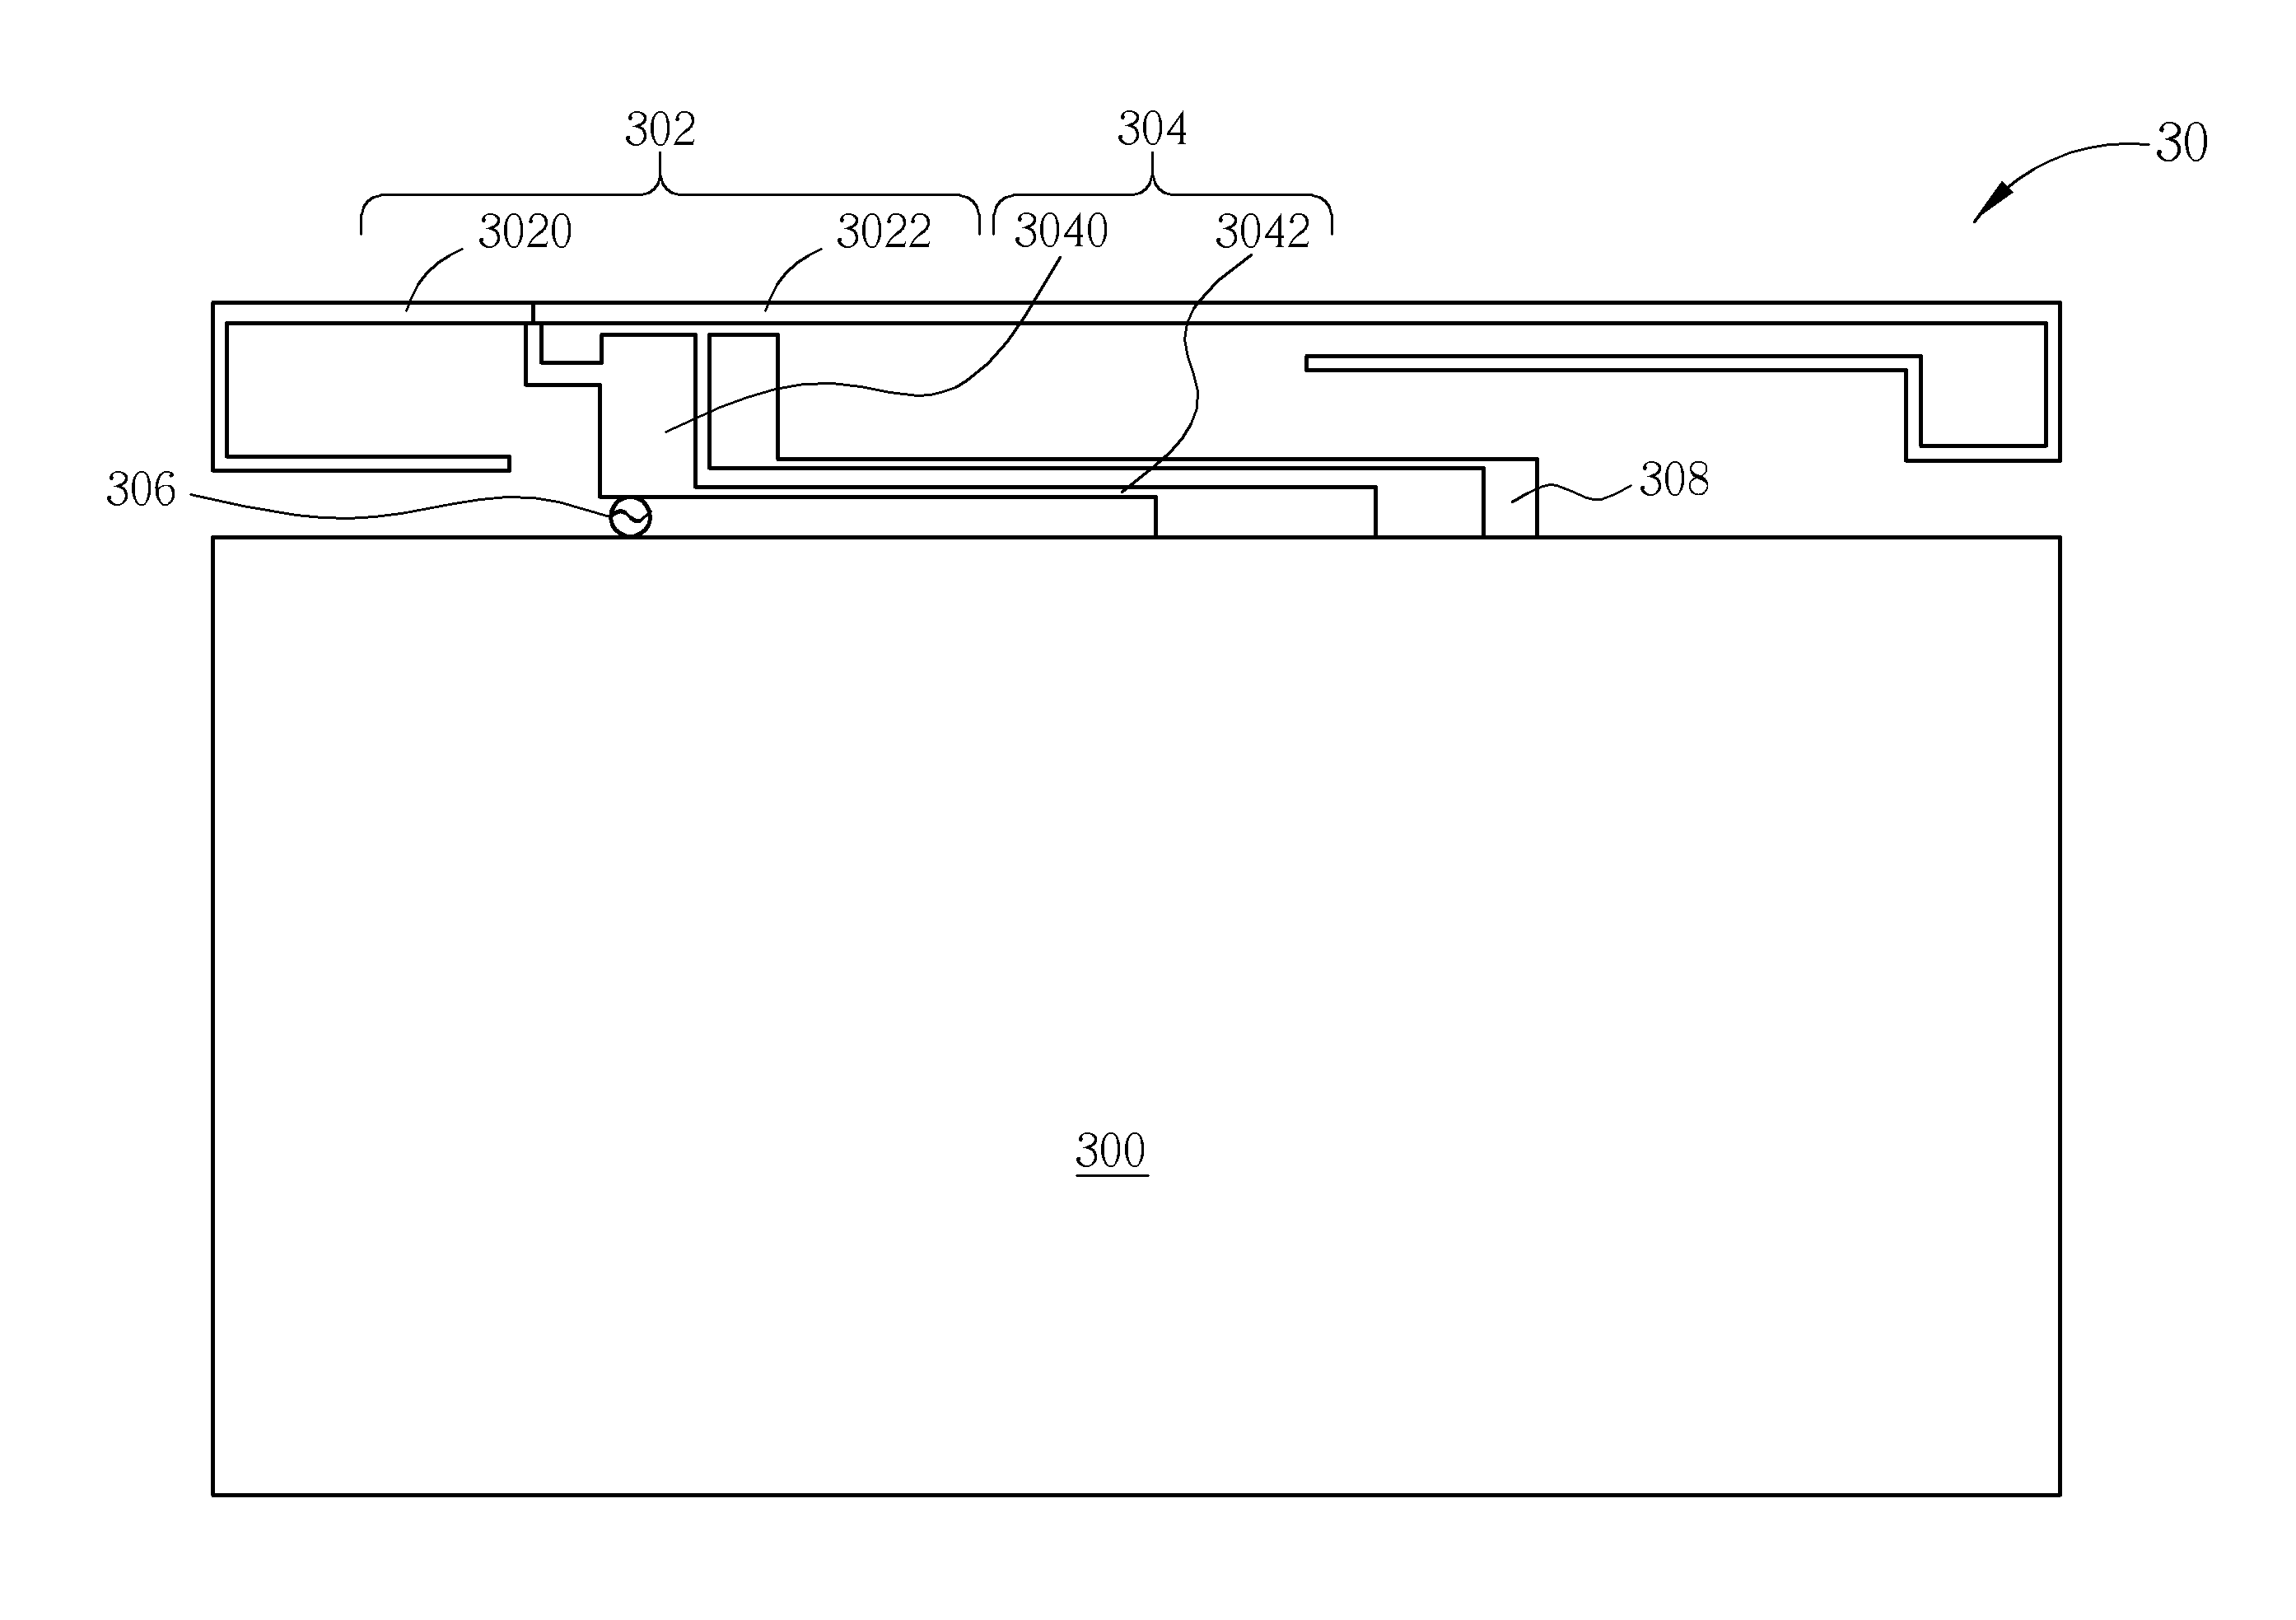 Antenna with Multiple Resonating Conditions